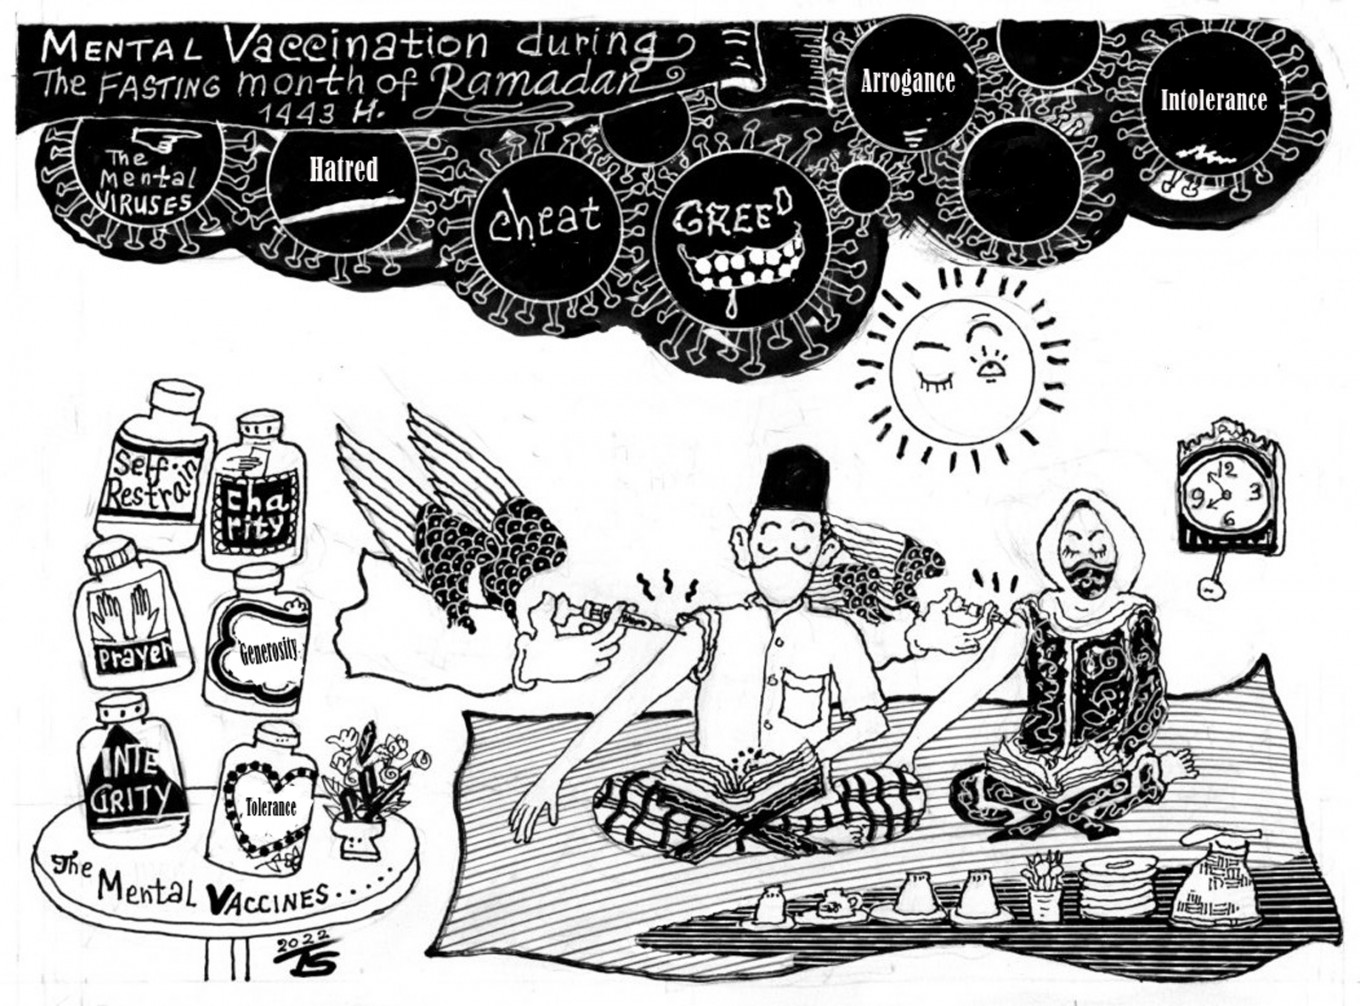 Ramadan cartoon (JP/T. Sutanto) This article was published in thejakartapost.com with the title "A humble Ramadan". Click to read: https://www.thejakartapost.com/opinion/2022/04/02/a-humble-ramadan.html. Download The Jakarta Post app for easier and faster news access: Android: http://bit.ly/tjp-android iOS: http://bit.ly/tjp-ios